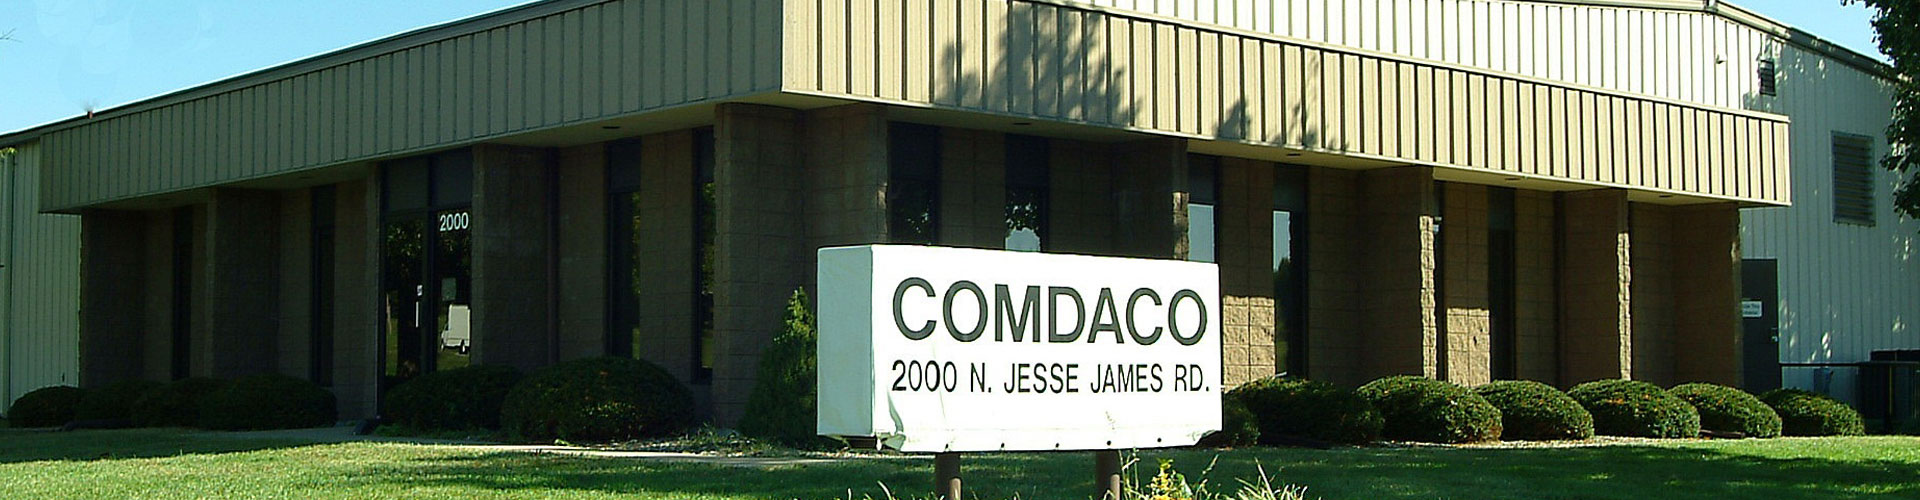 Resources for Comdaco Rubber Manufacturing Services in Kansas City Missouri